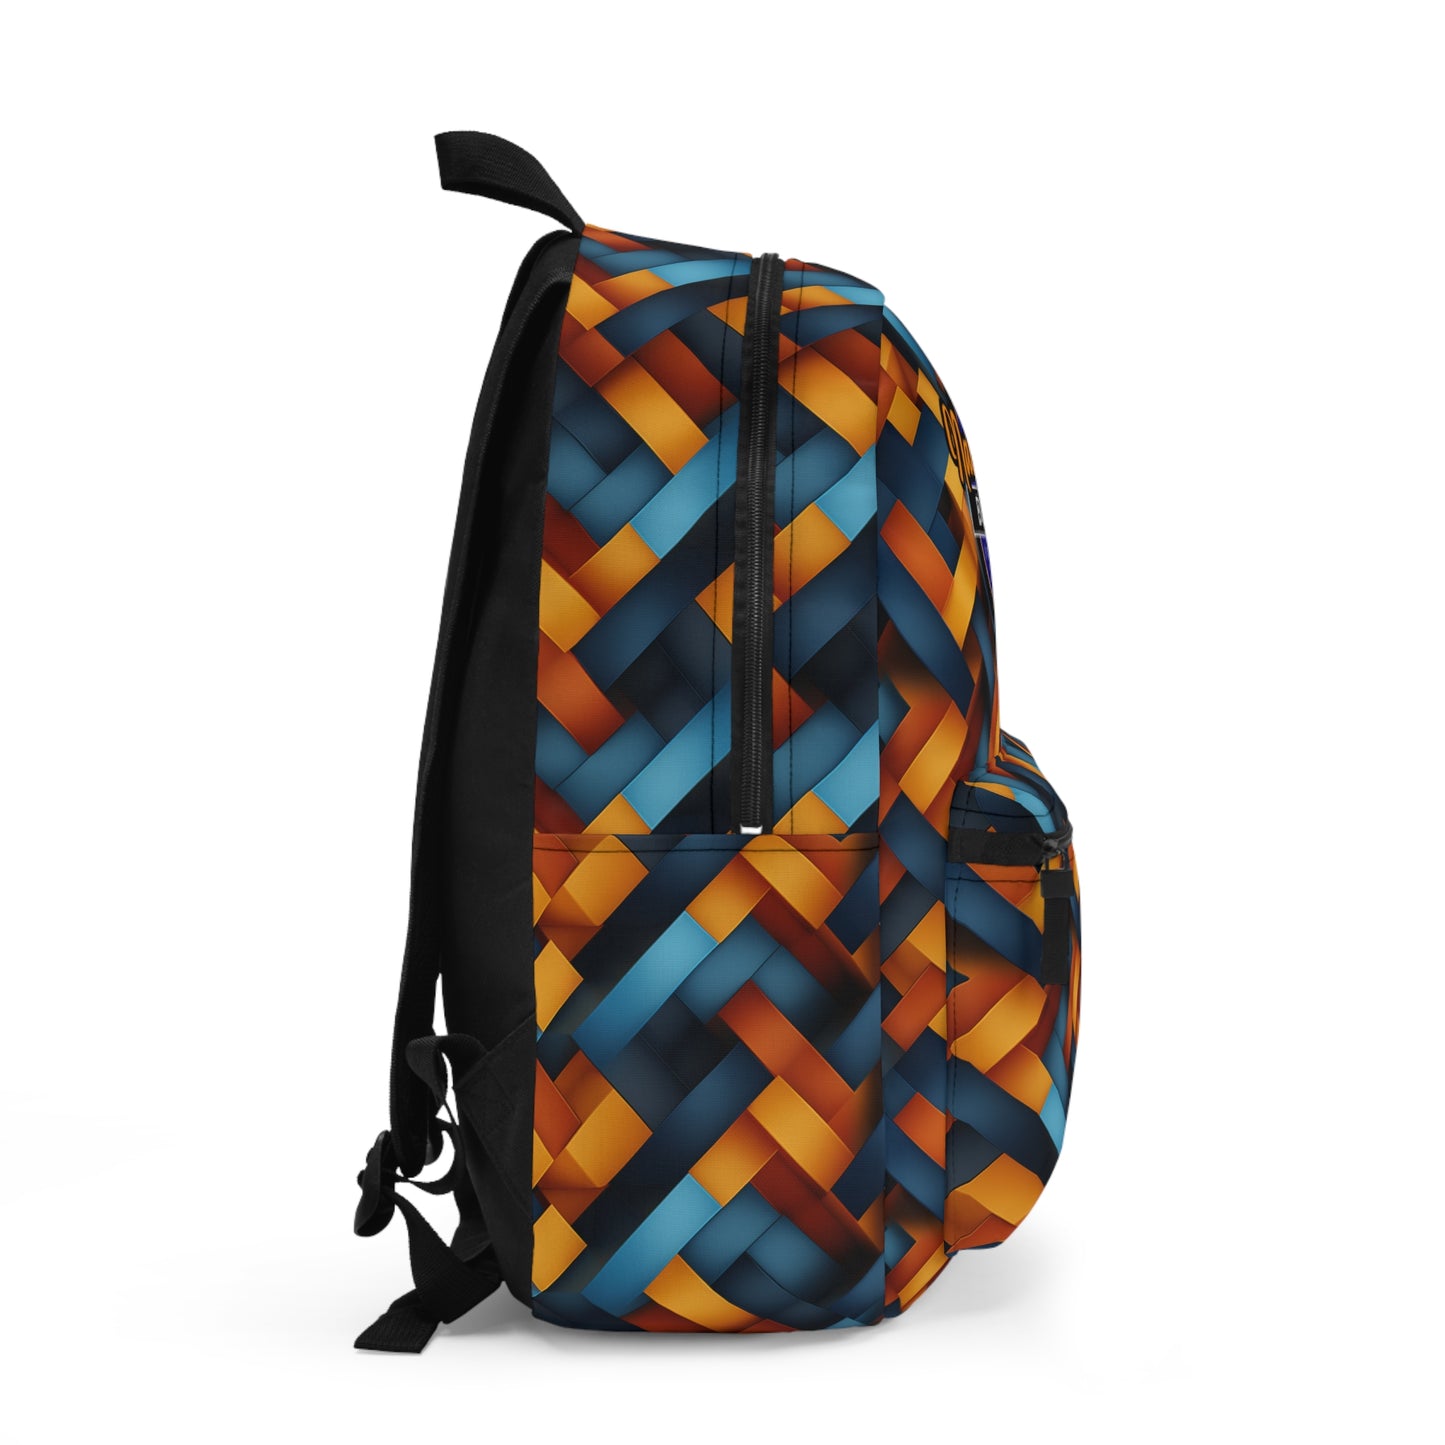 NachoWay “A-Maze-Ing” Backpack